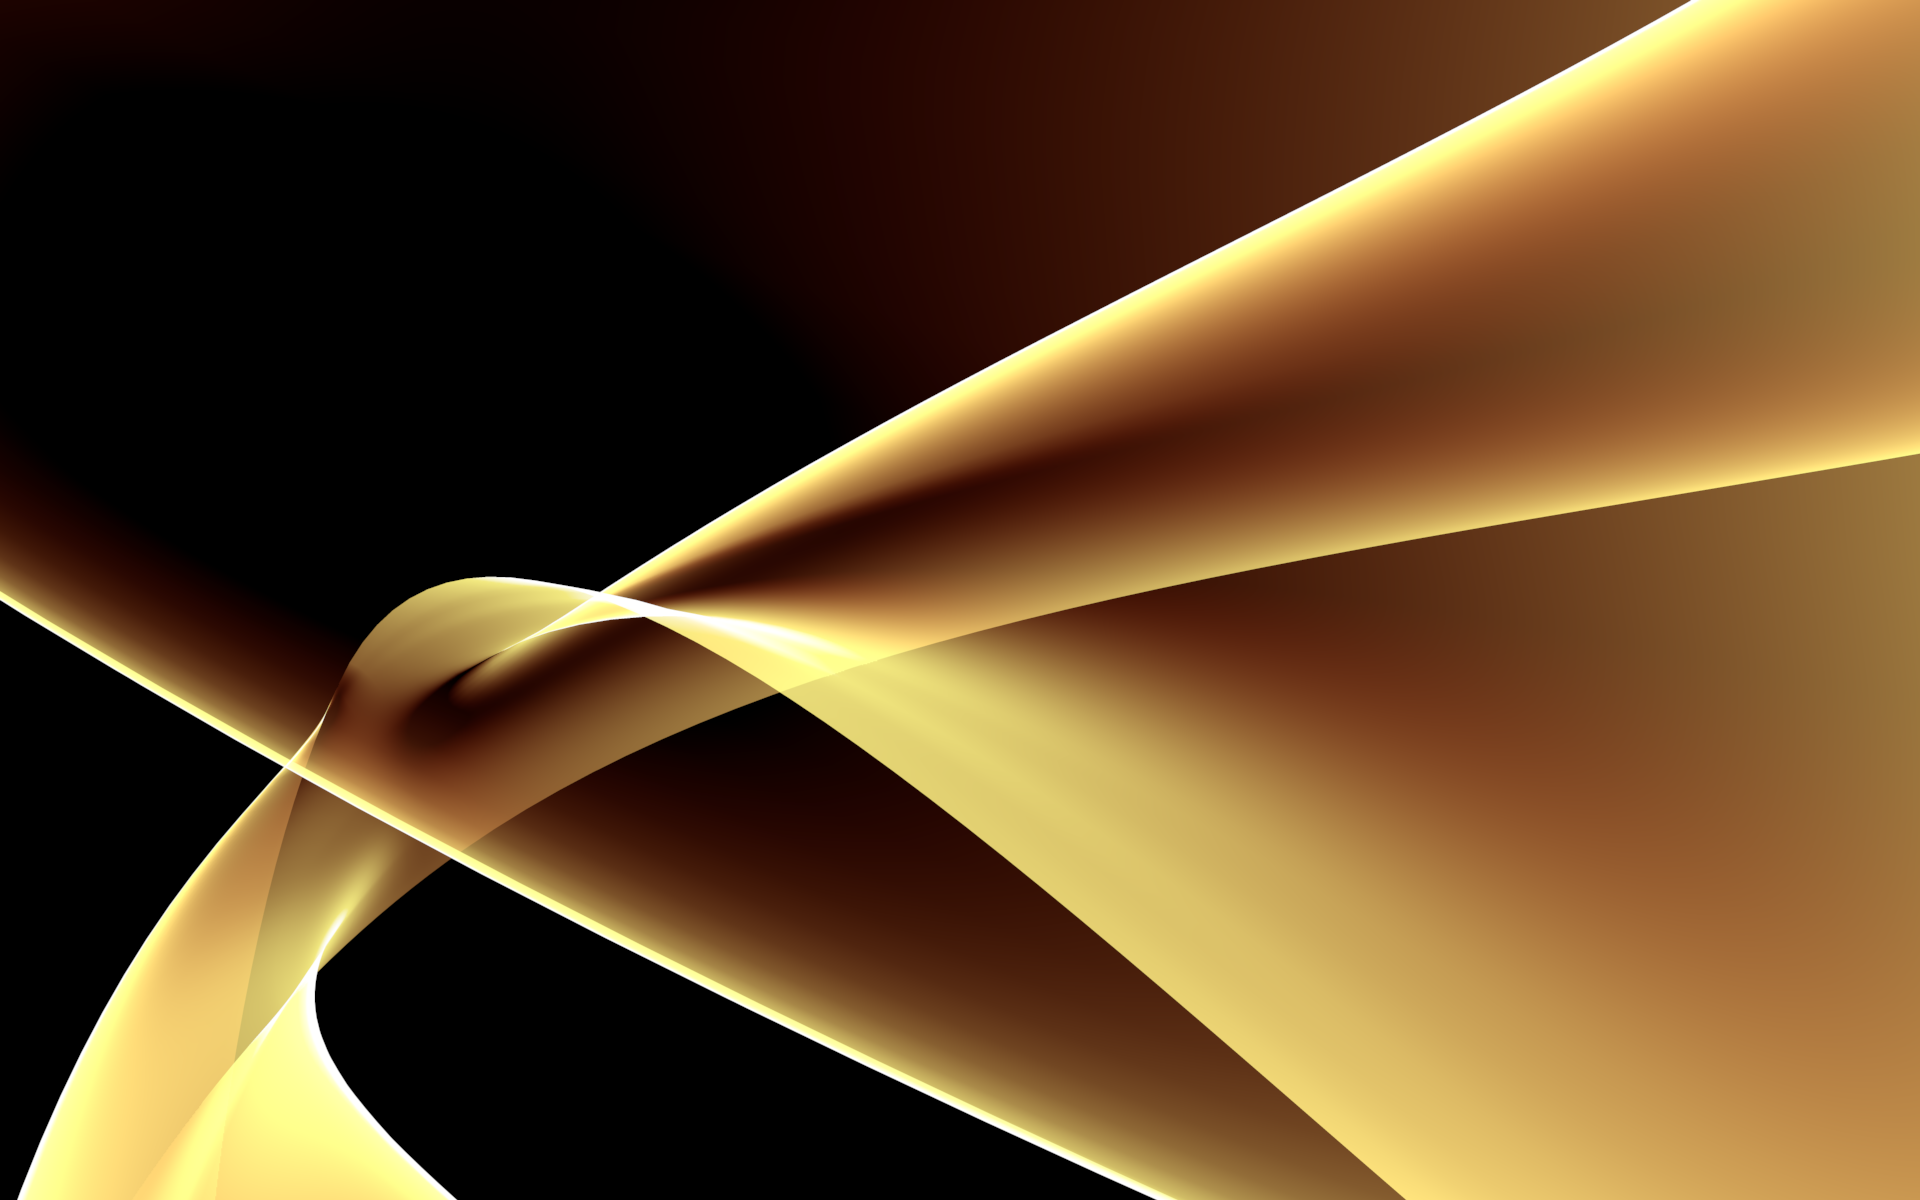 Light Gold High quality image Free download